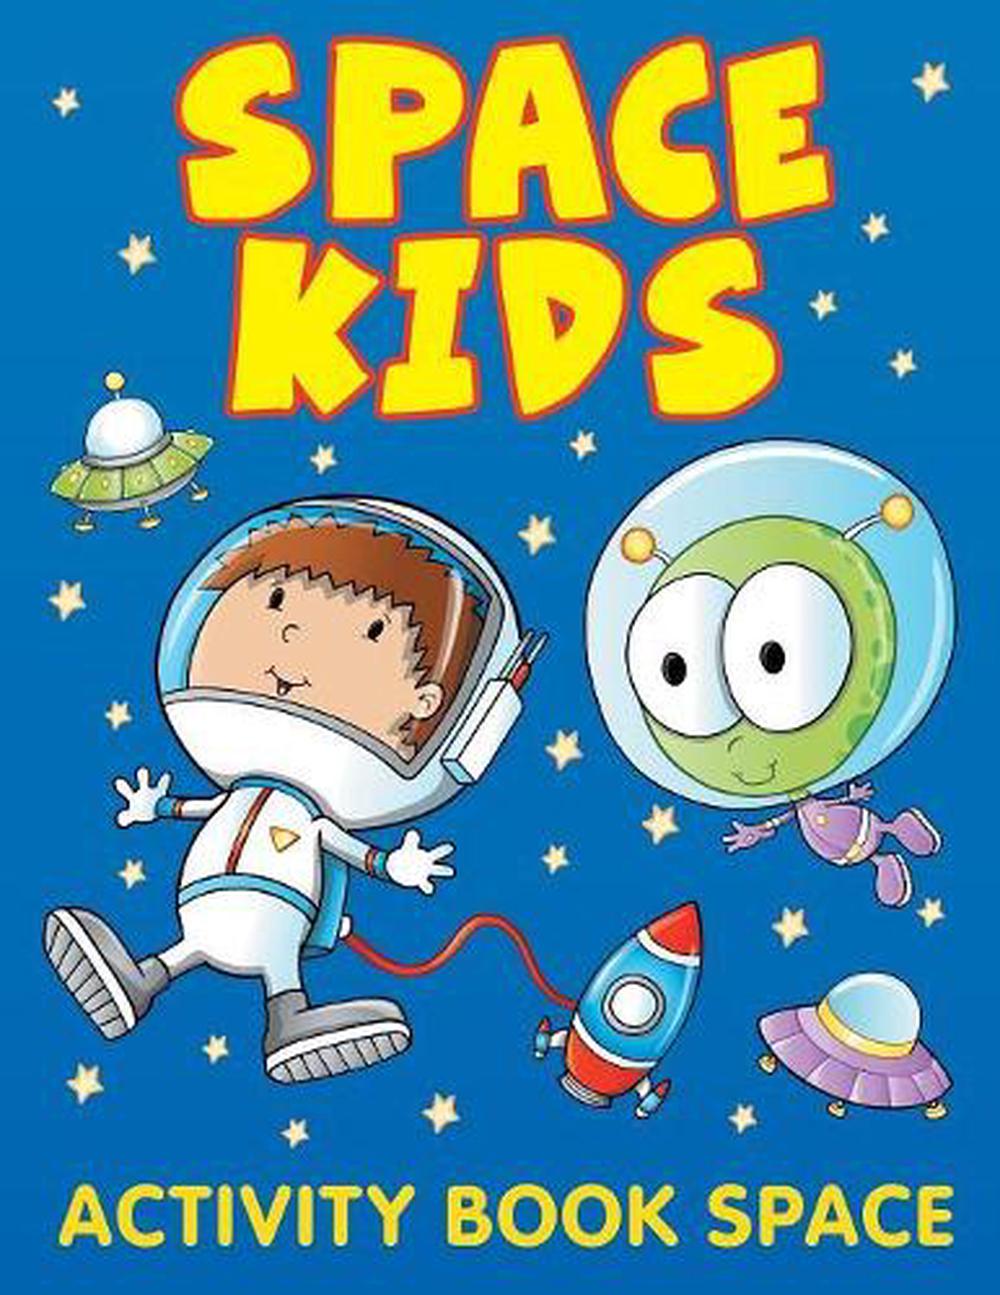 Space Kids: Activity Book Space by Jupiter Kids (English) Paperback ...